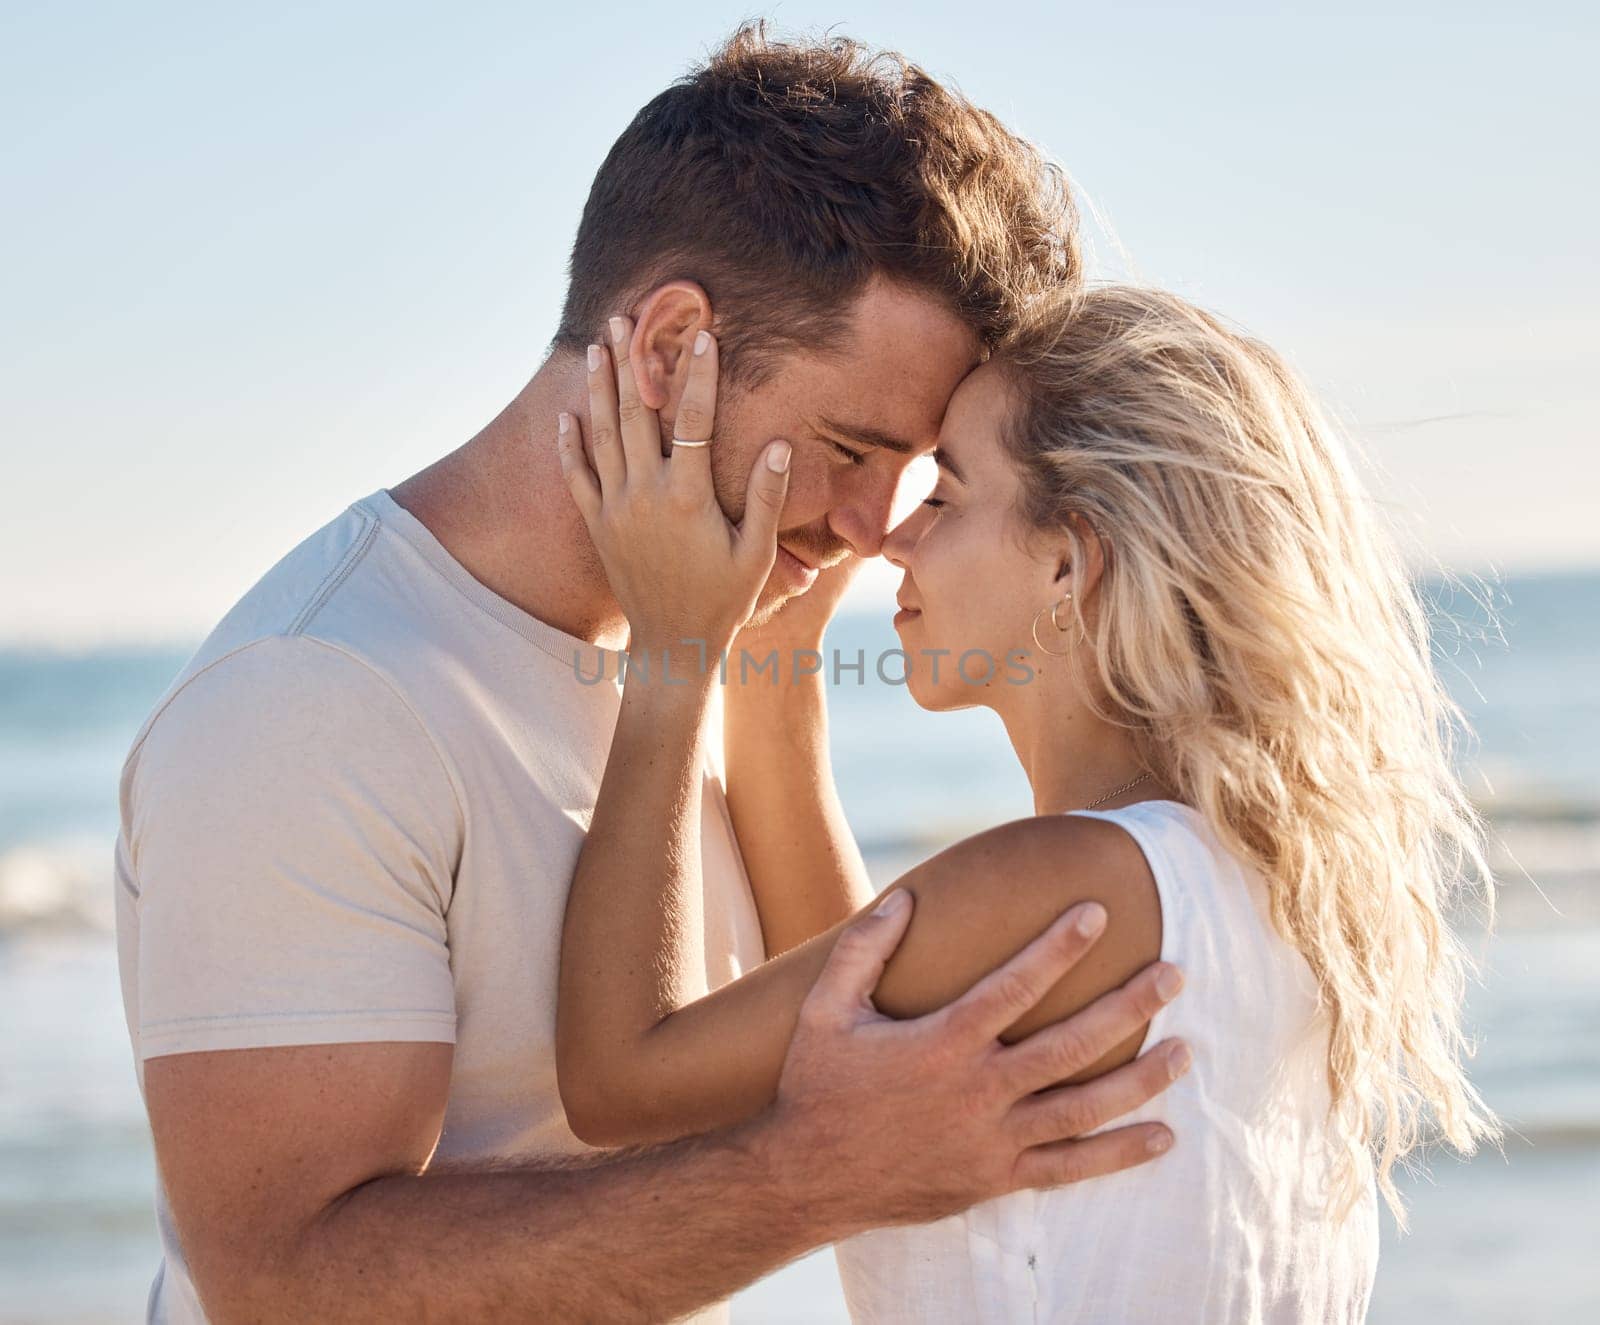 Love, beach and couple with head together for intimacy, romance and joy on weekend. Relationship, happiness and young man and woman by ocean enjoying summer holiday, vacation and honeymoon in nature.